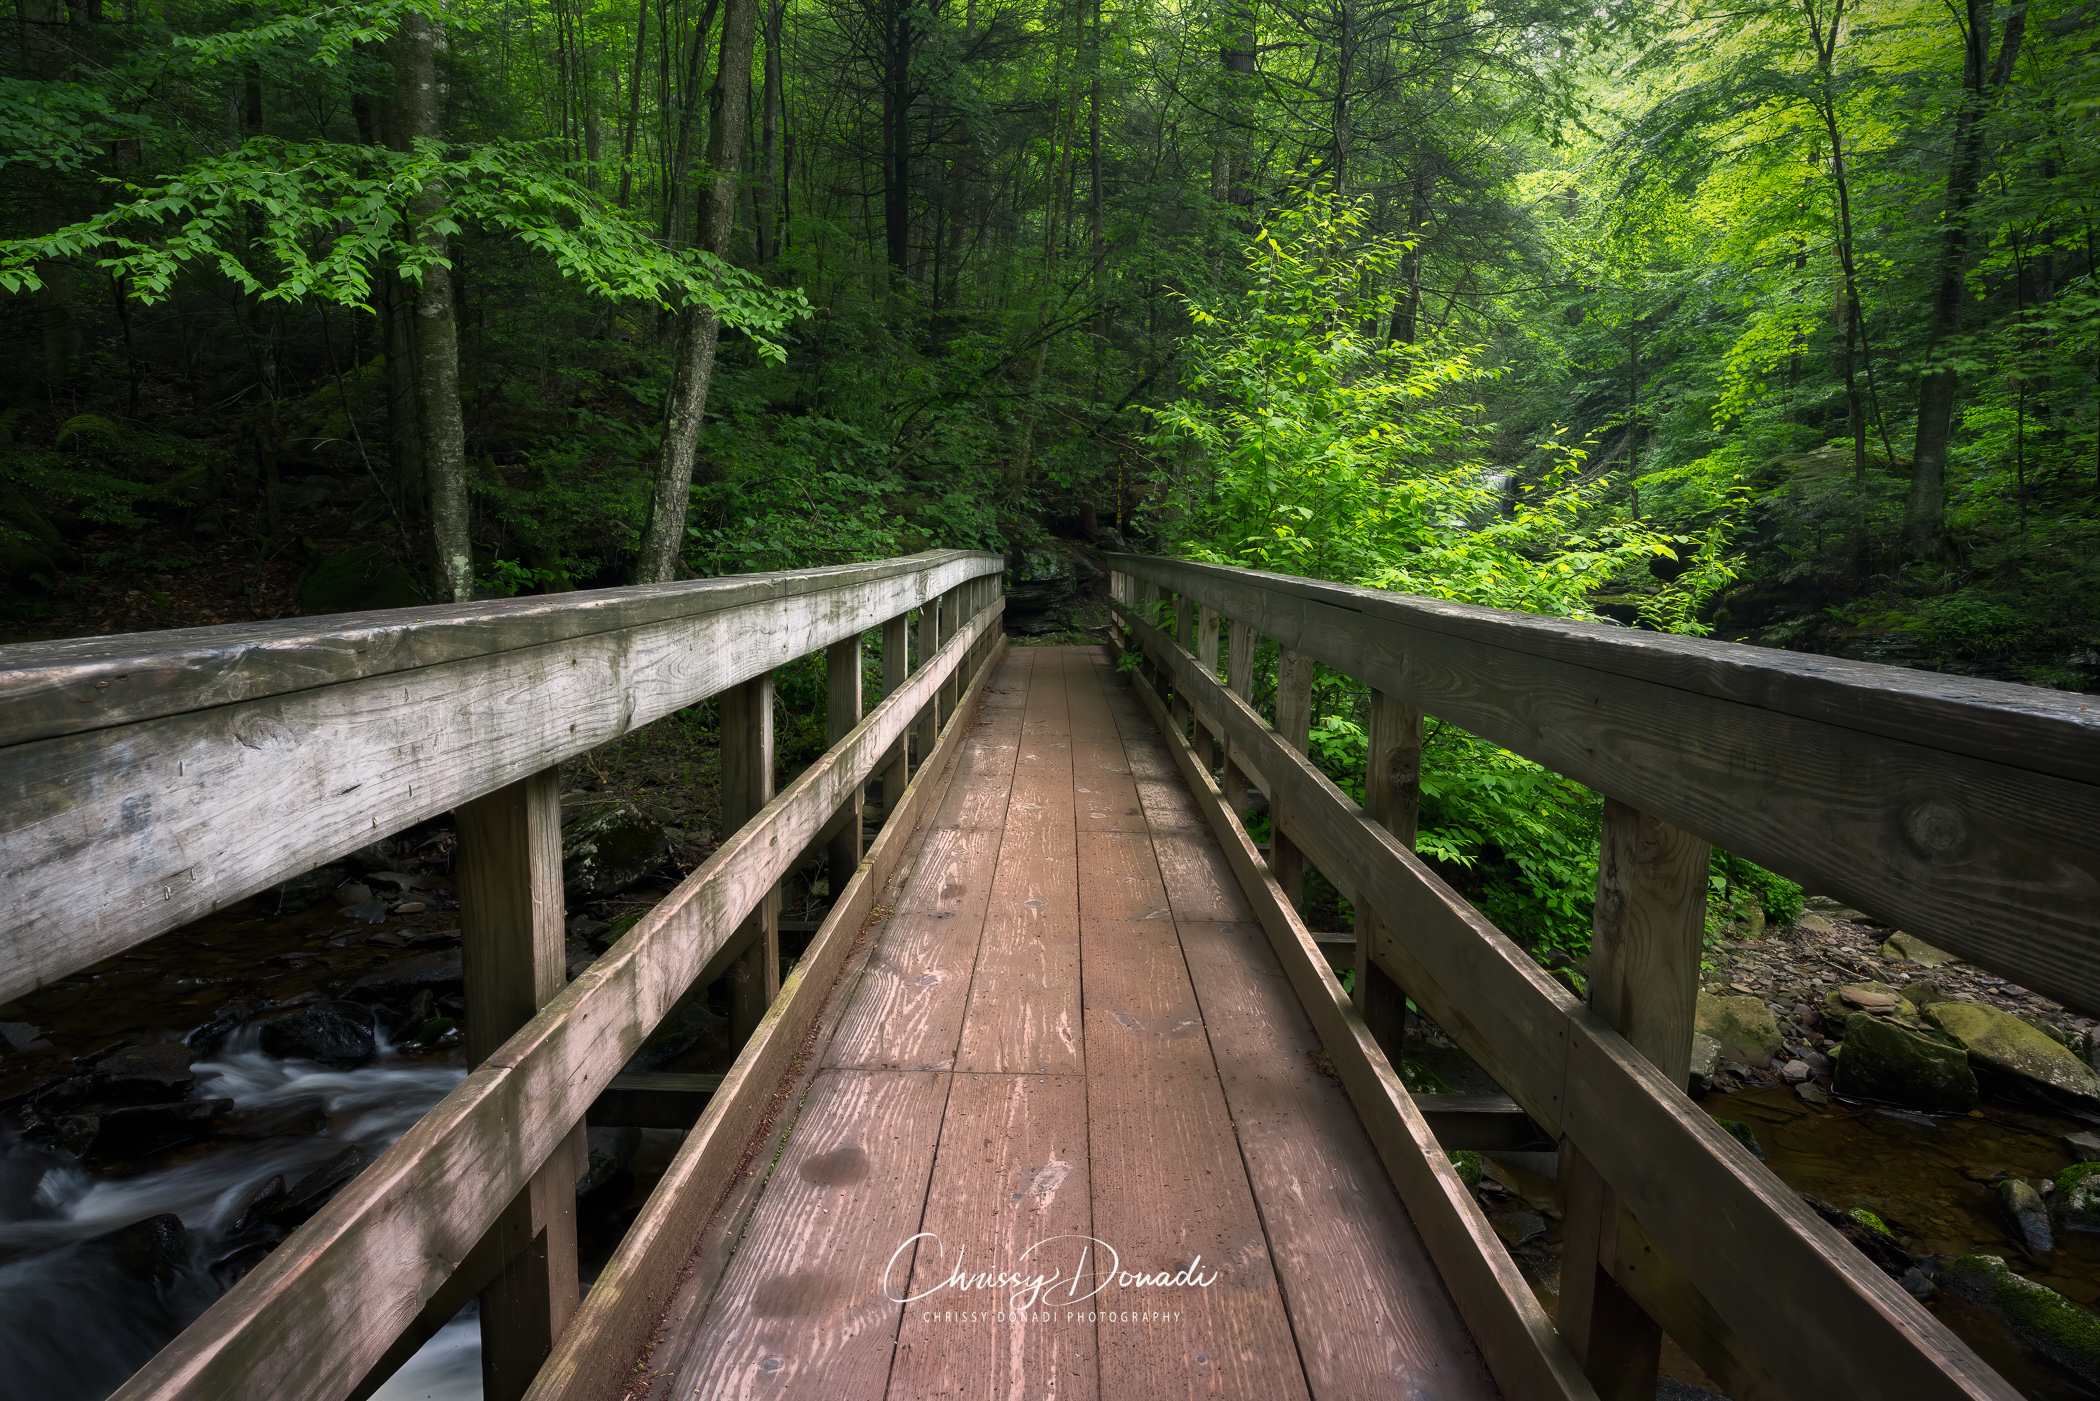 Straight path over a wooden bridge through a lush, summer Appalachian forest with a waterfall flowing underneath.